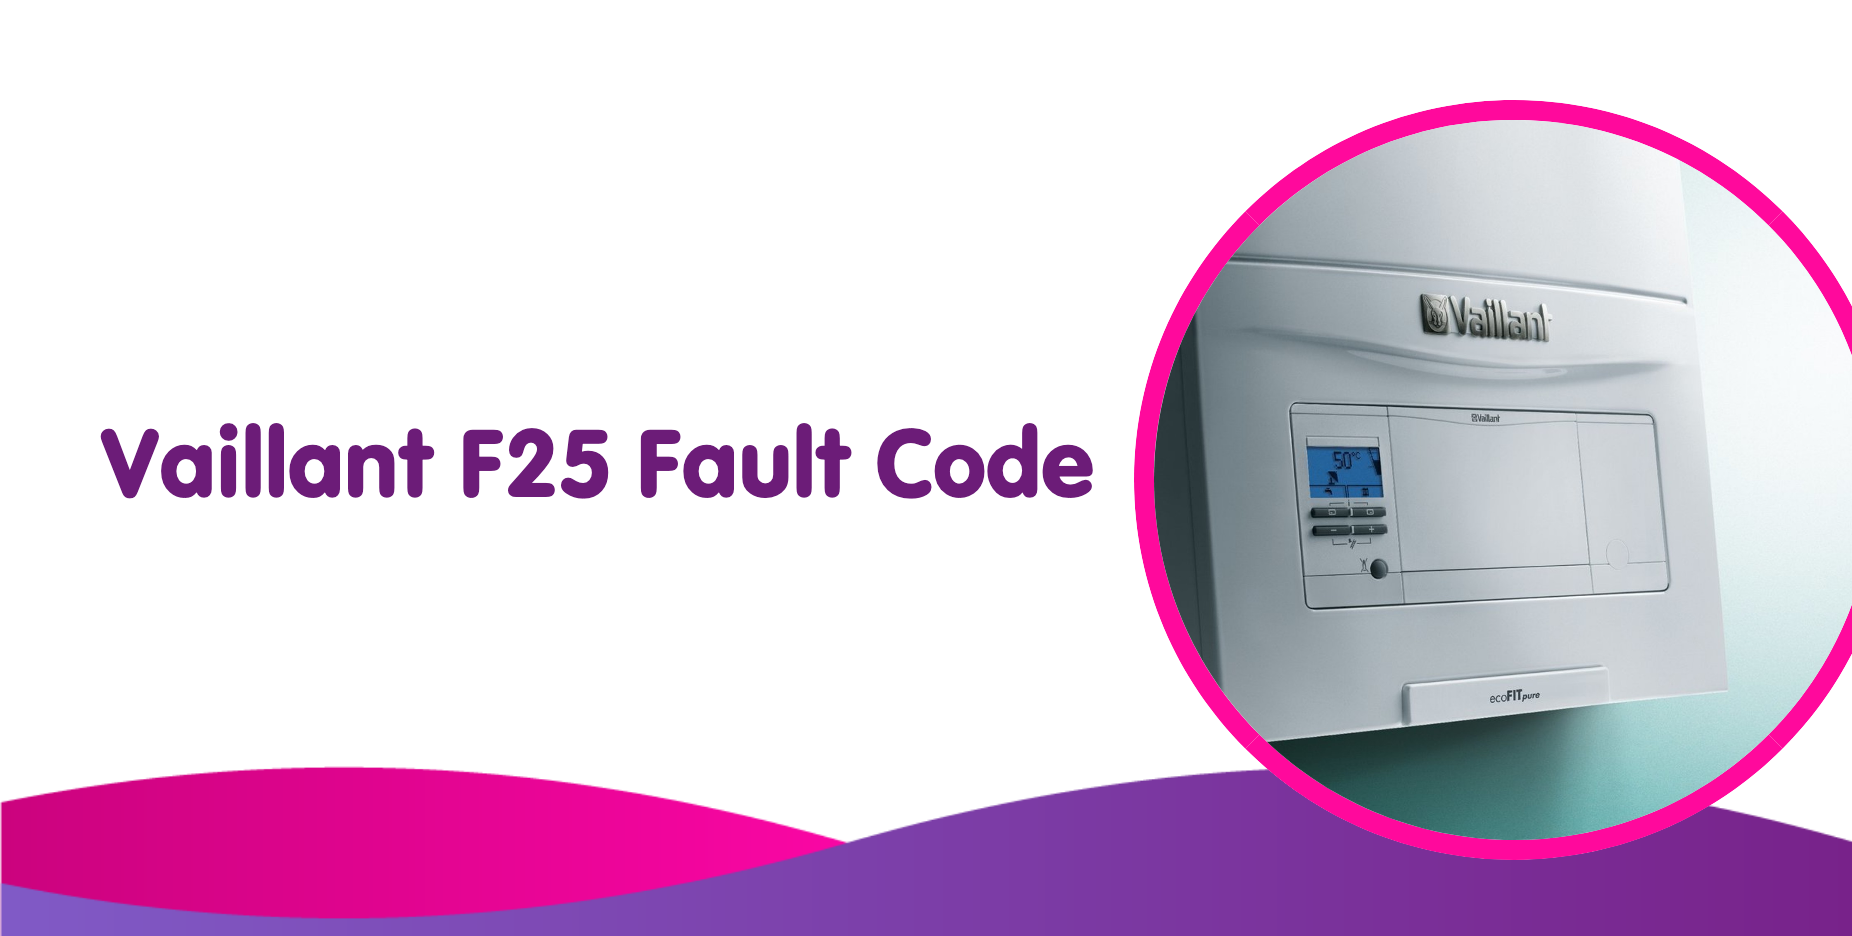 Vaillant F25 Fault Code Meaning, Causes & How To Fix It